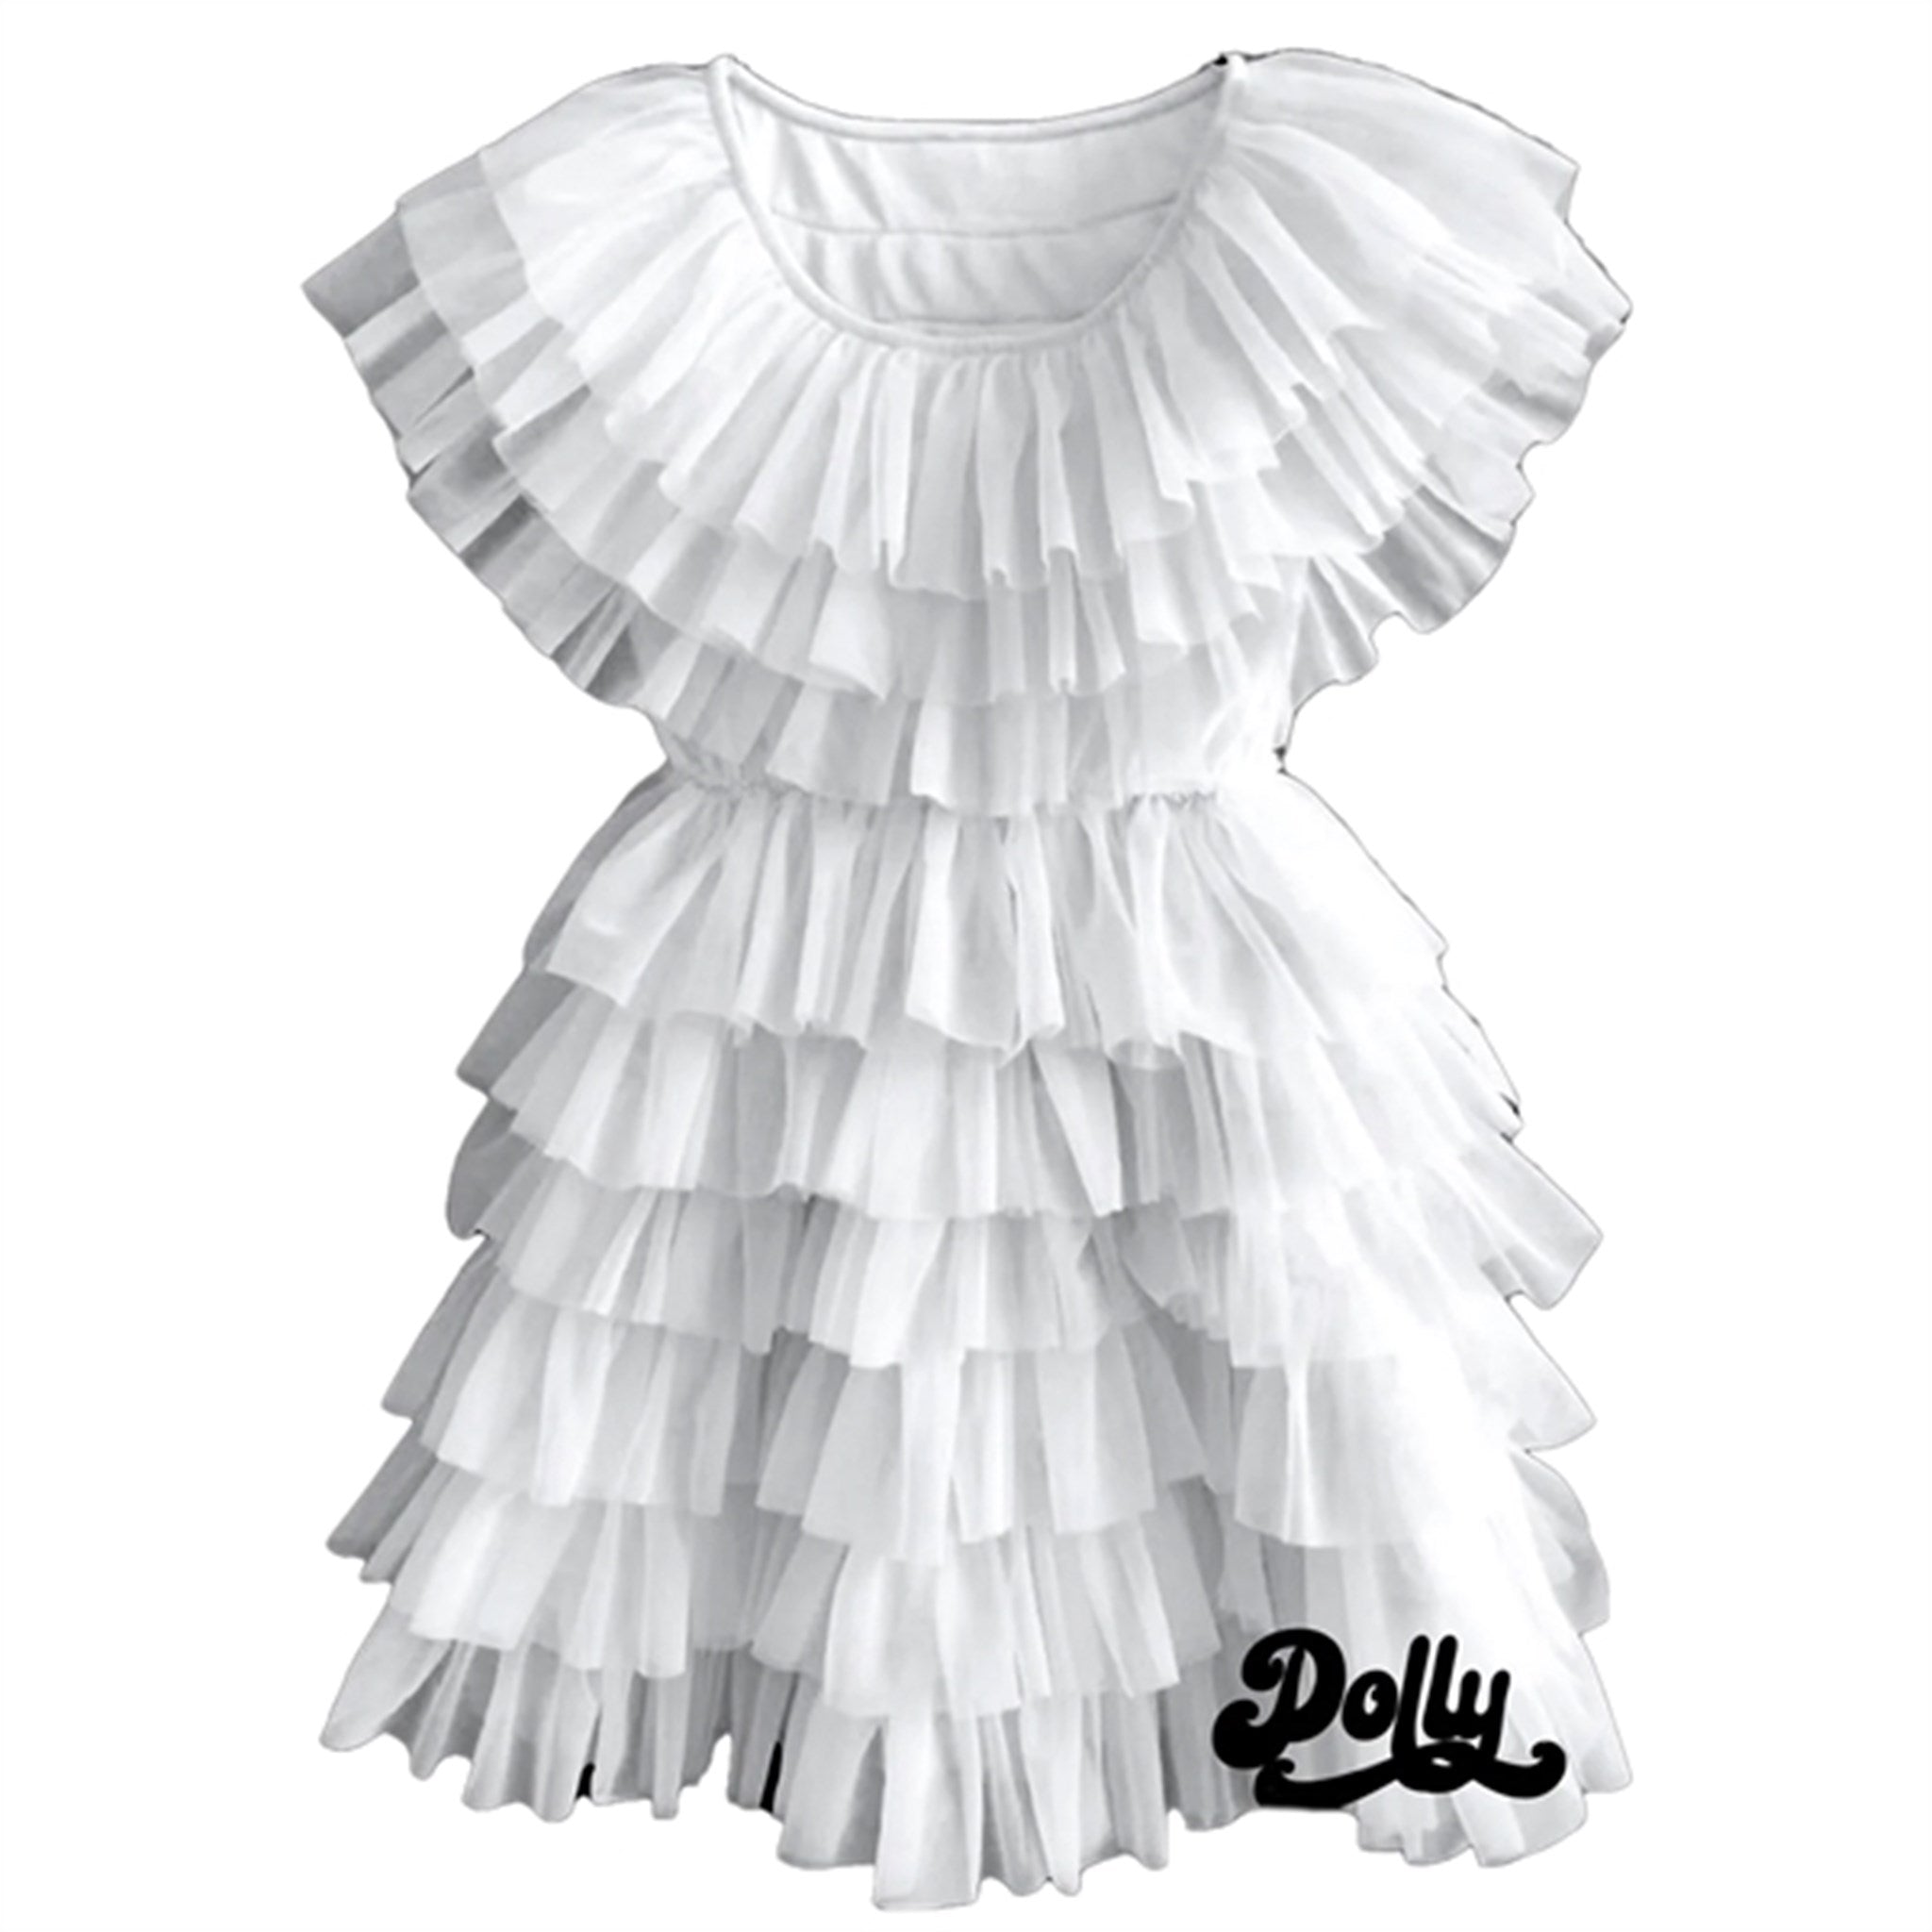 Dolly By Le Petit Tom Dolly Delicious Cake Kjole Whipped Cream White